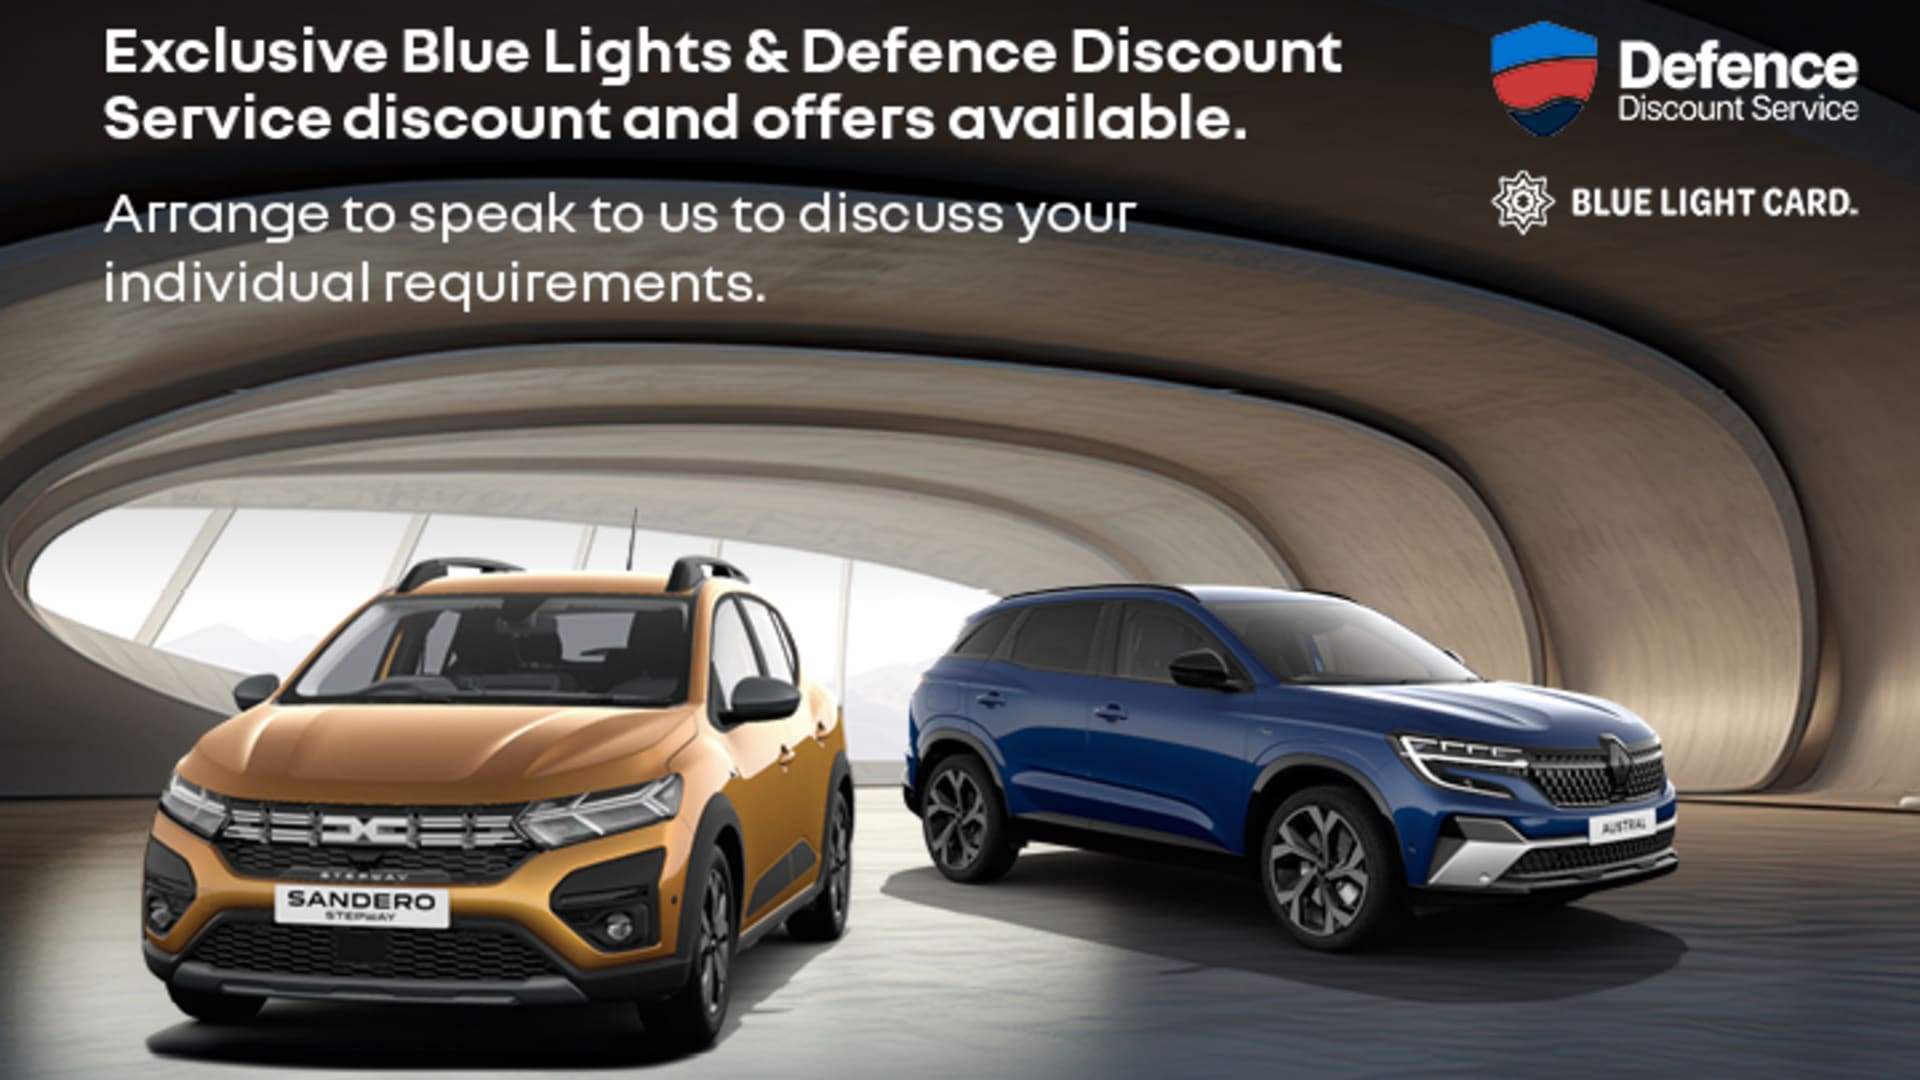 Exclusive Blue Lights & Defence Discount